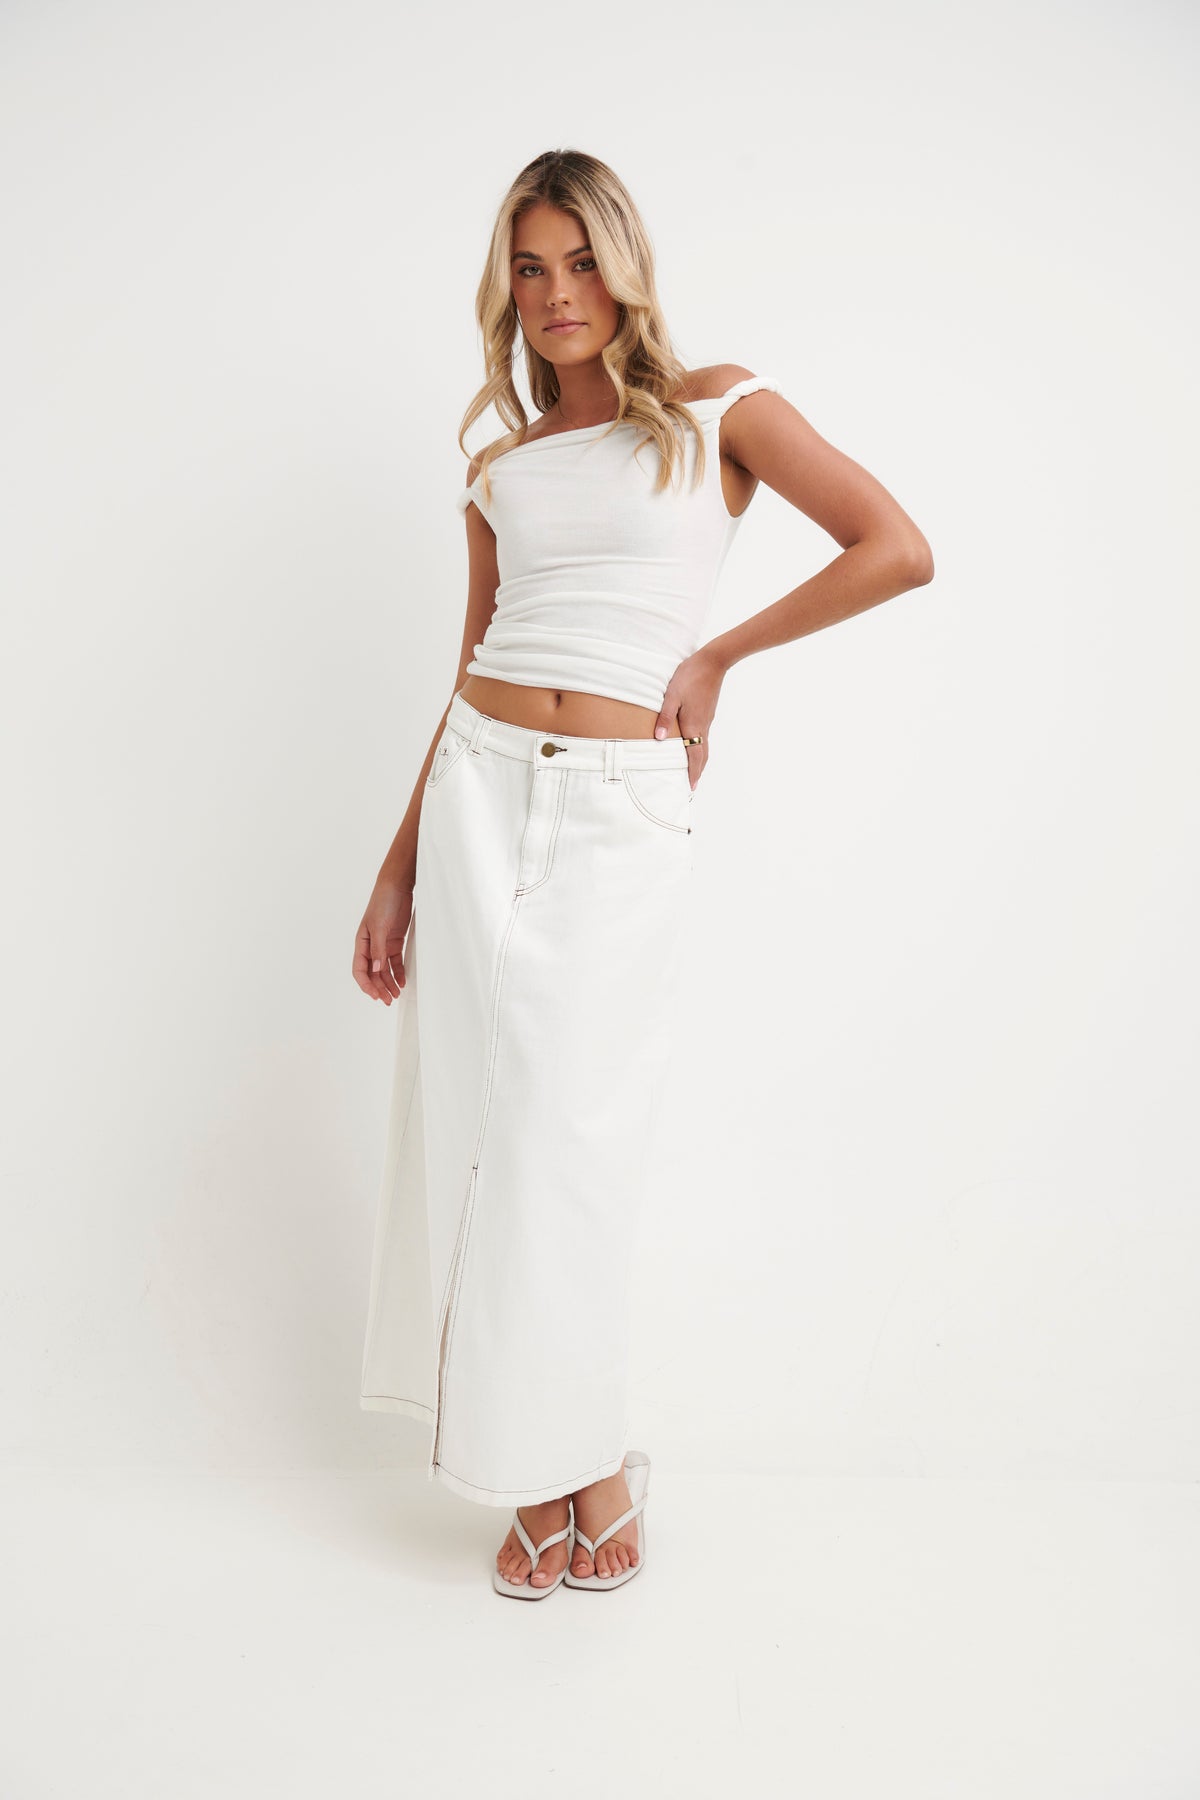 Rebecca Rope Off The Shoulder Top White